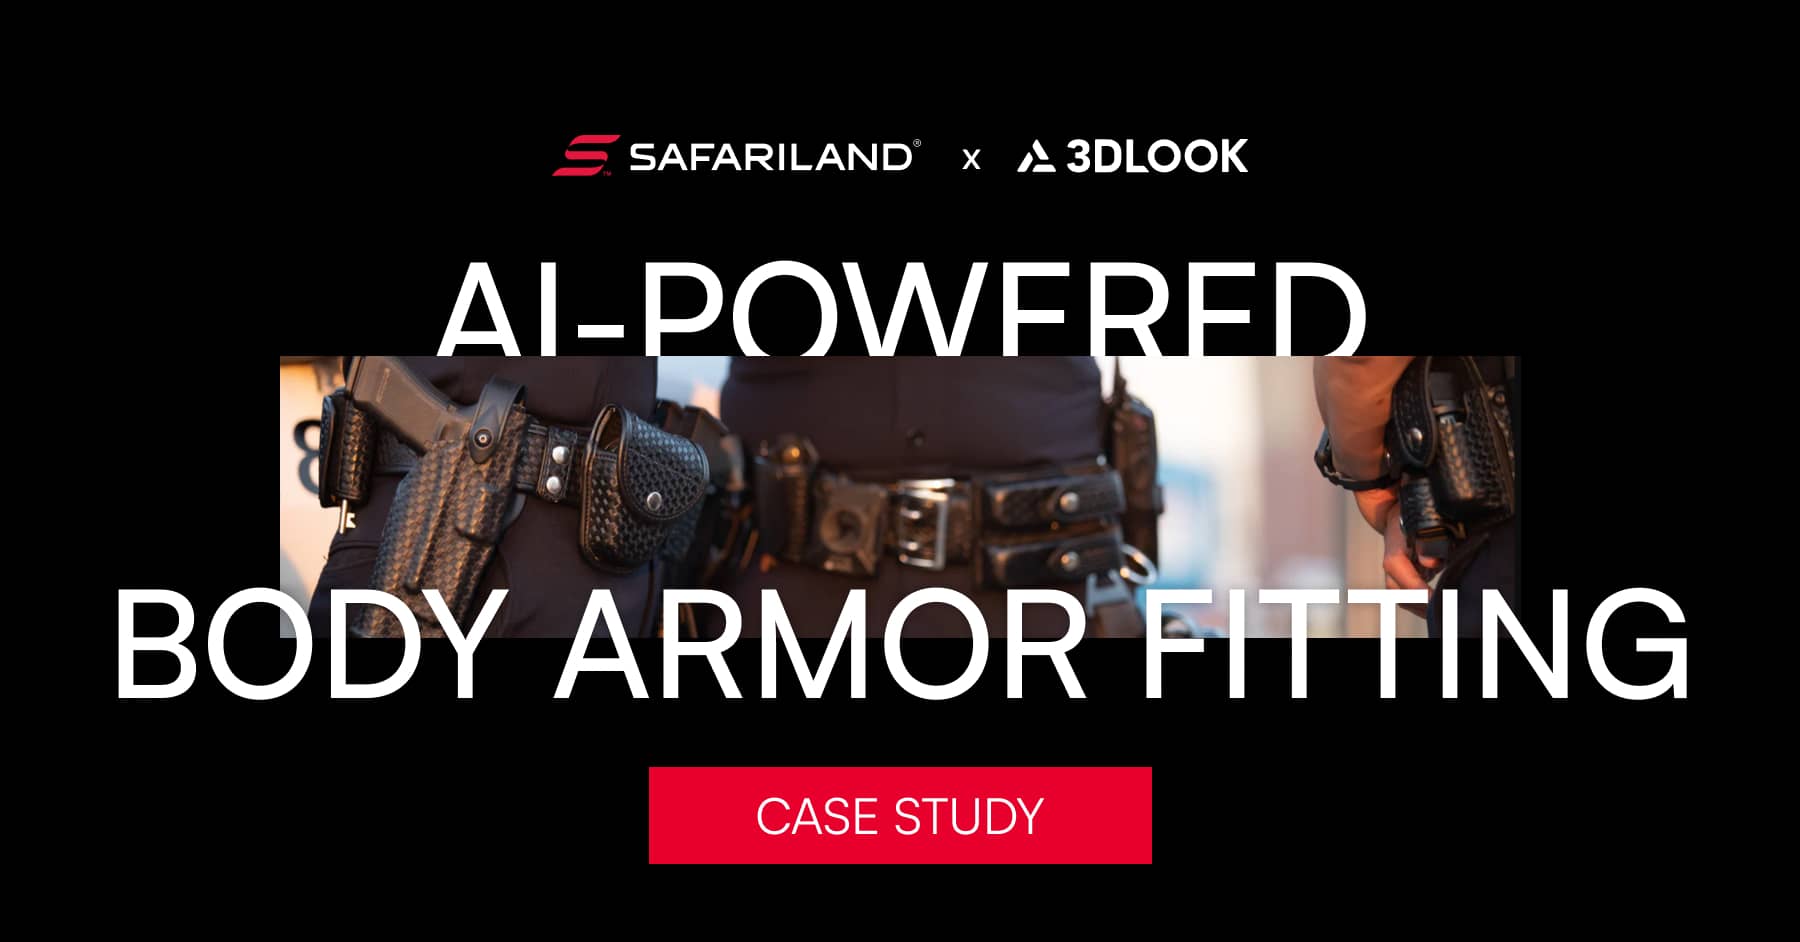 Case study on AI-powered mobile body scanning for body armor fitting featuring Safariland Group and 3DLook collaboration.